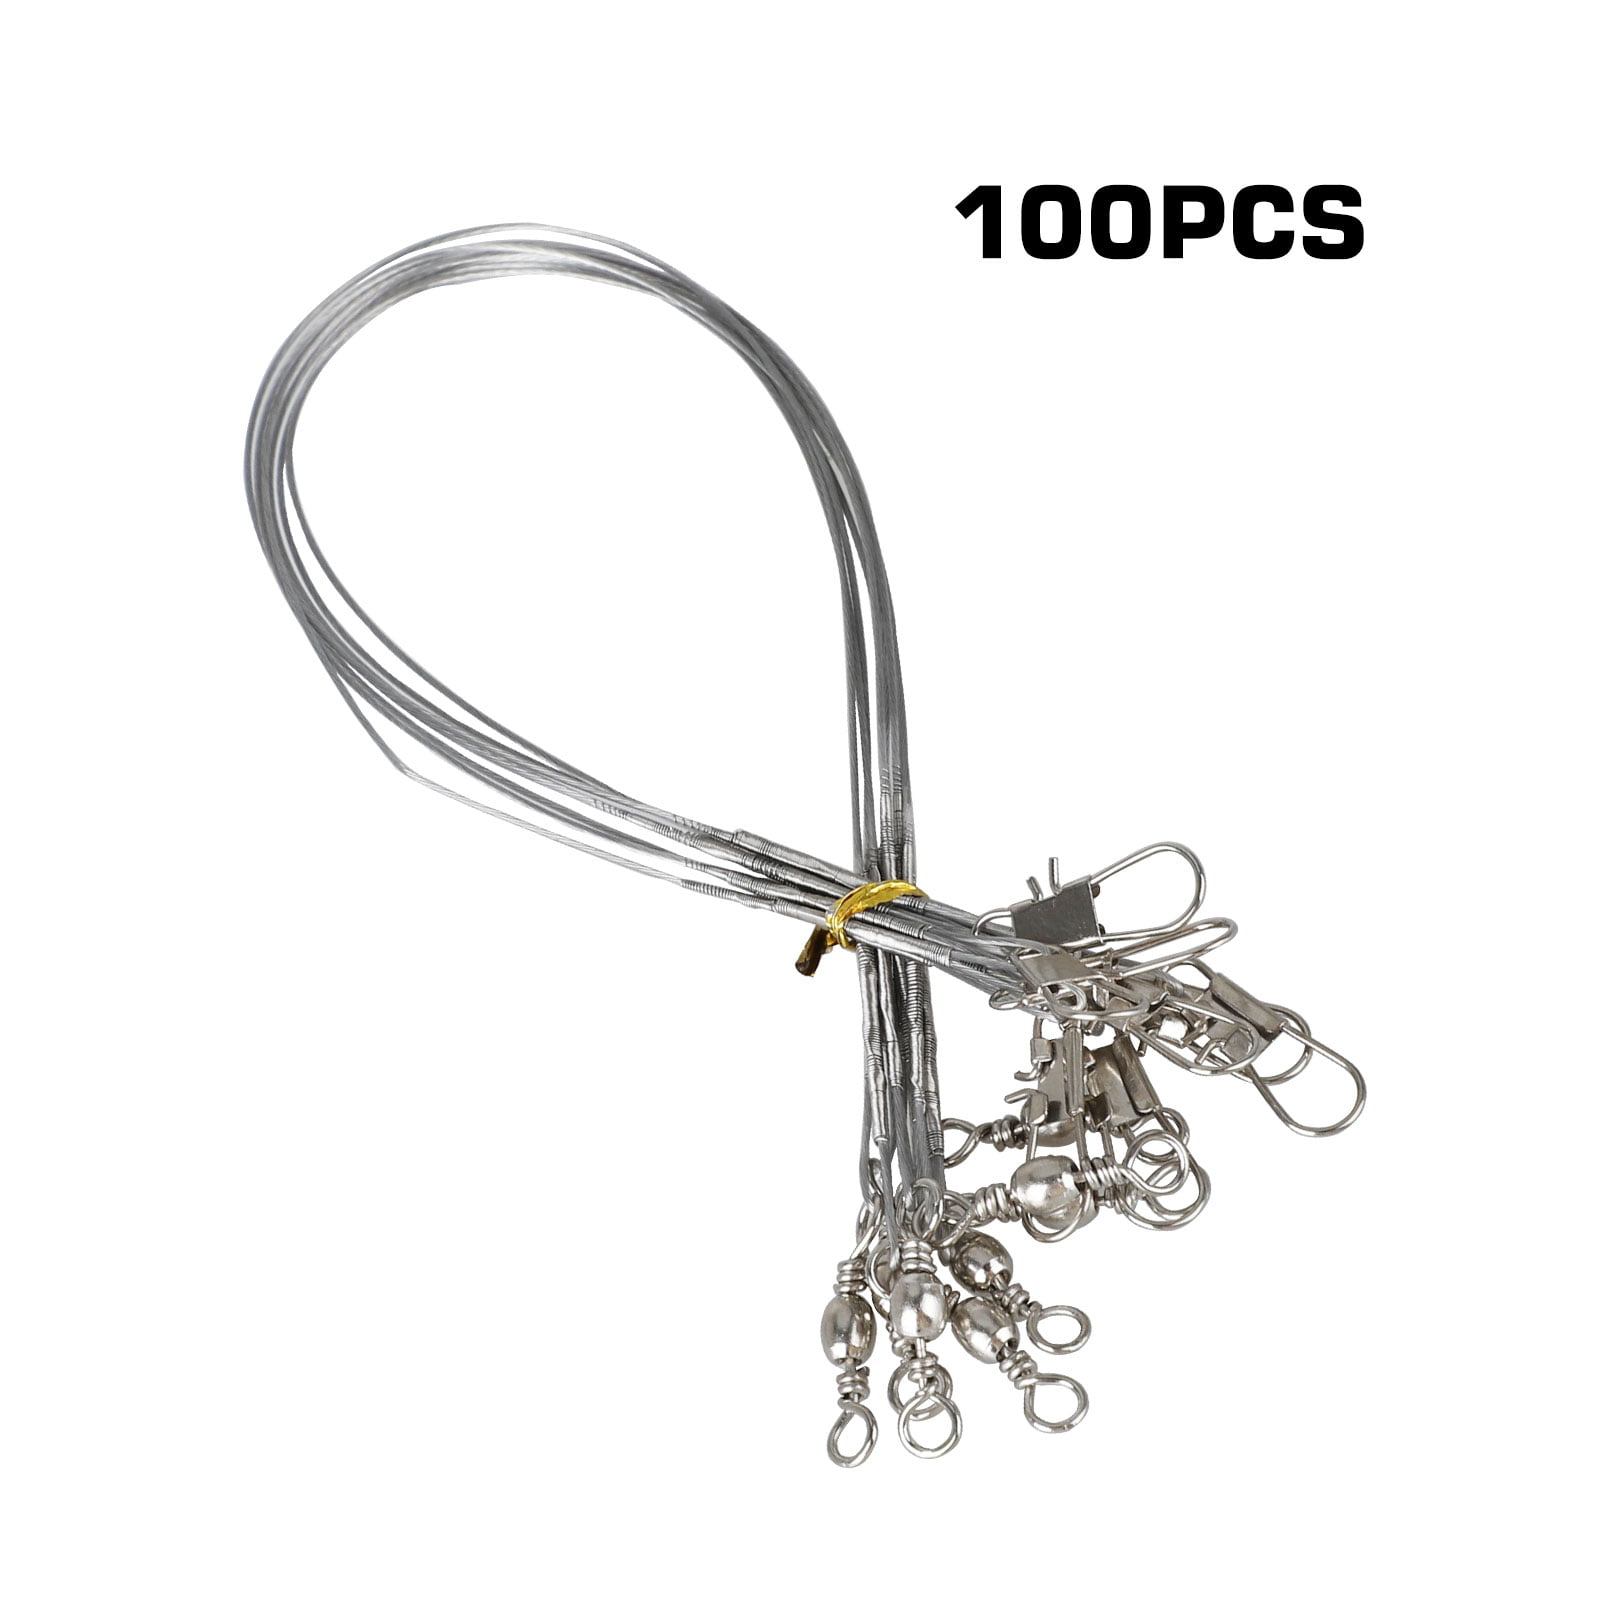 TSV 100PCS Stainless Steel Wire Fishing Leaders High